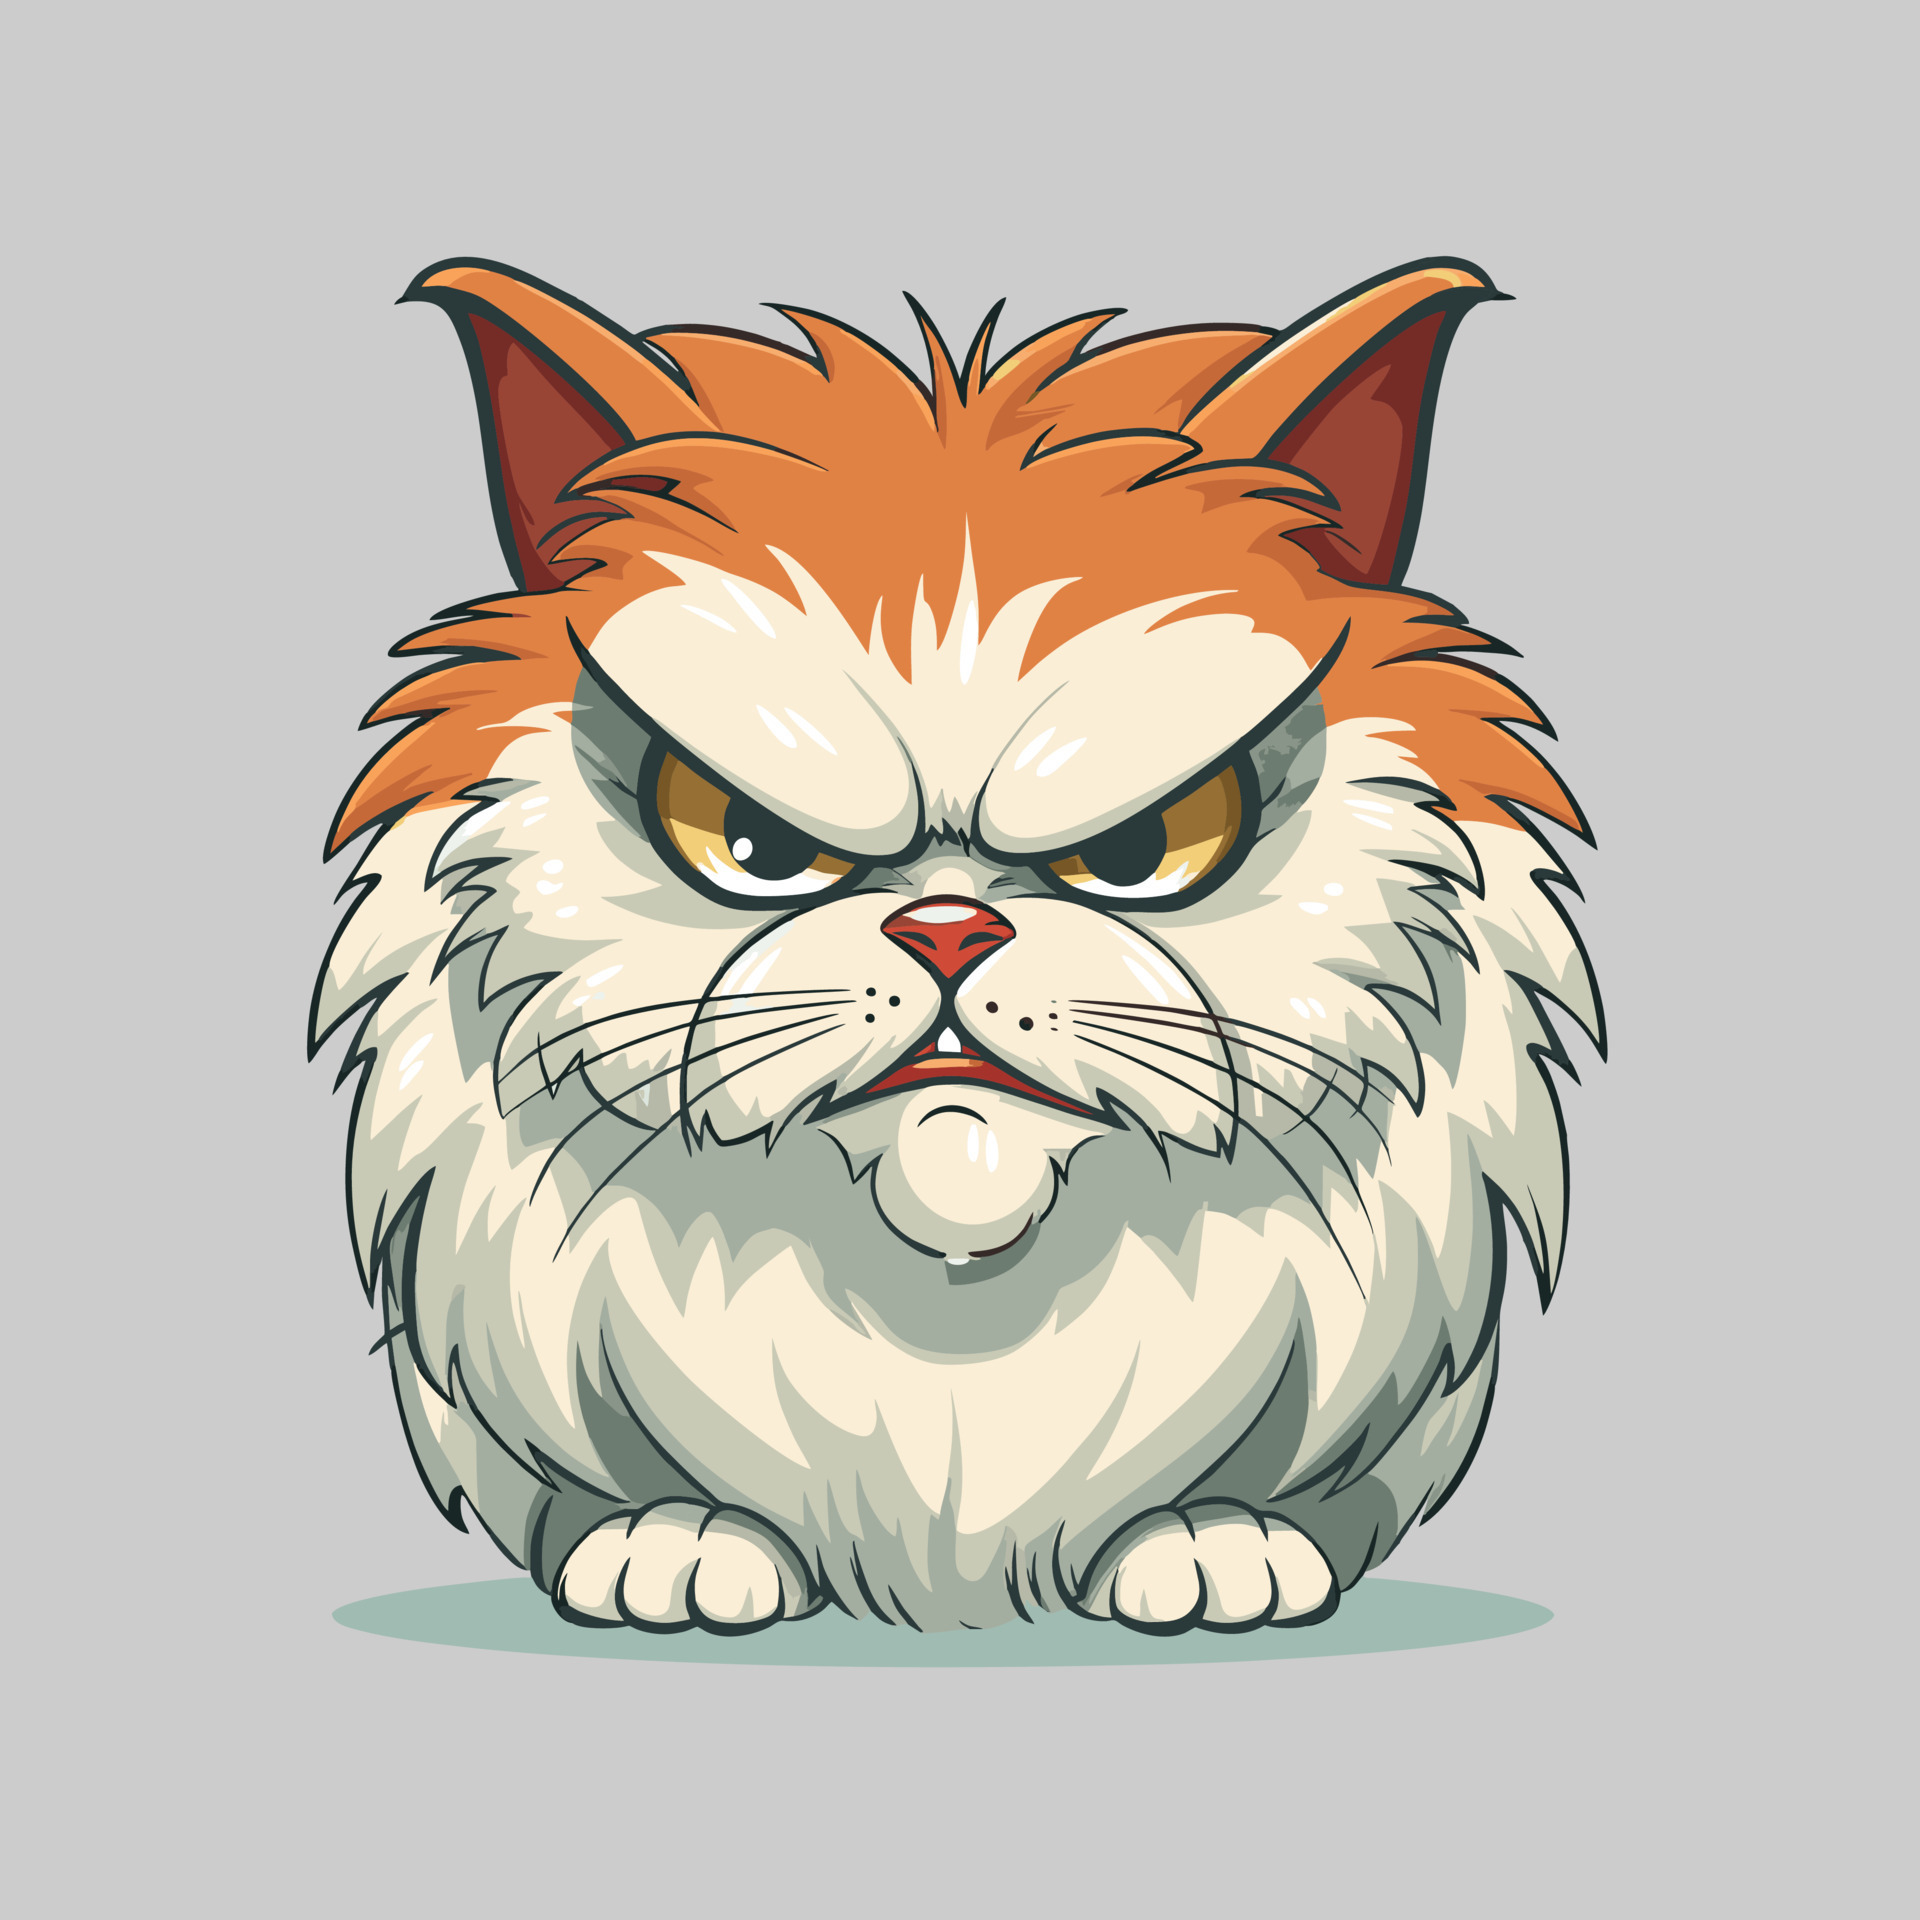 Angry cat 1 Royalty Free Vector Image - VectorStock